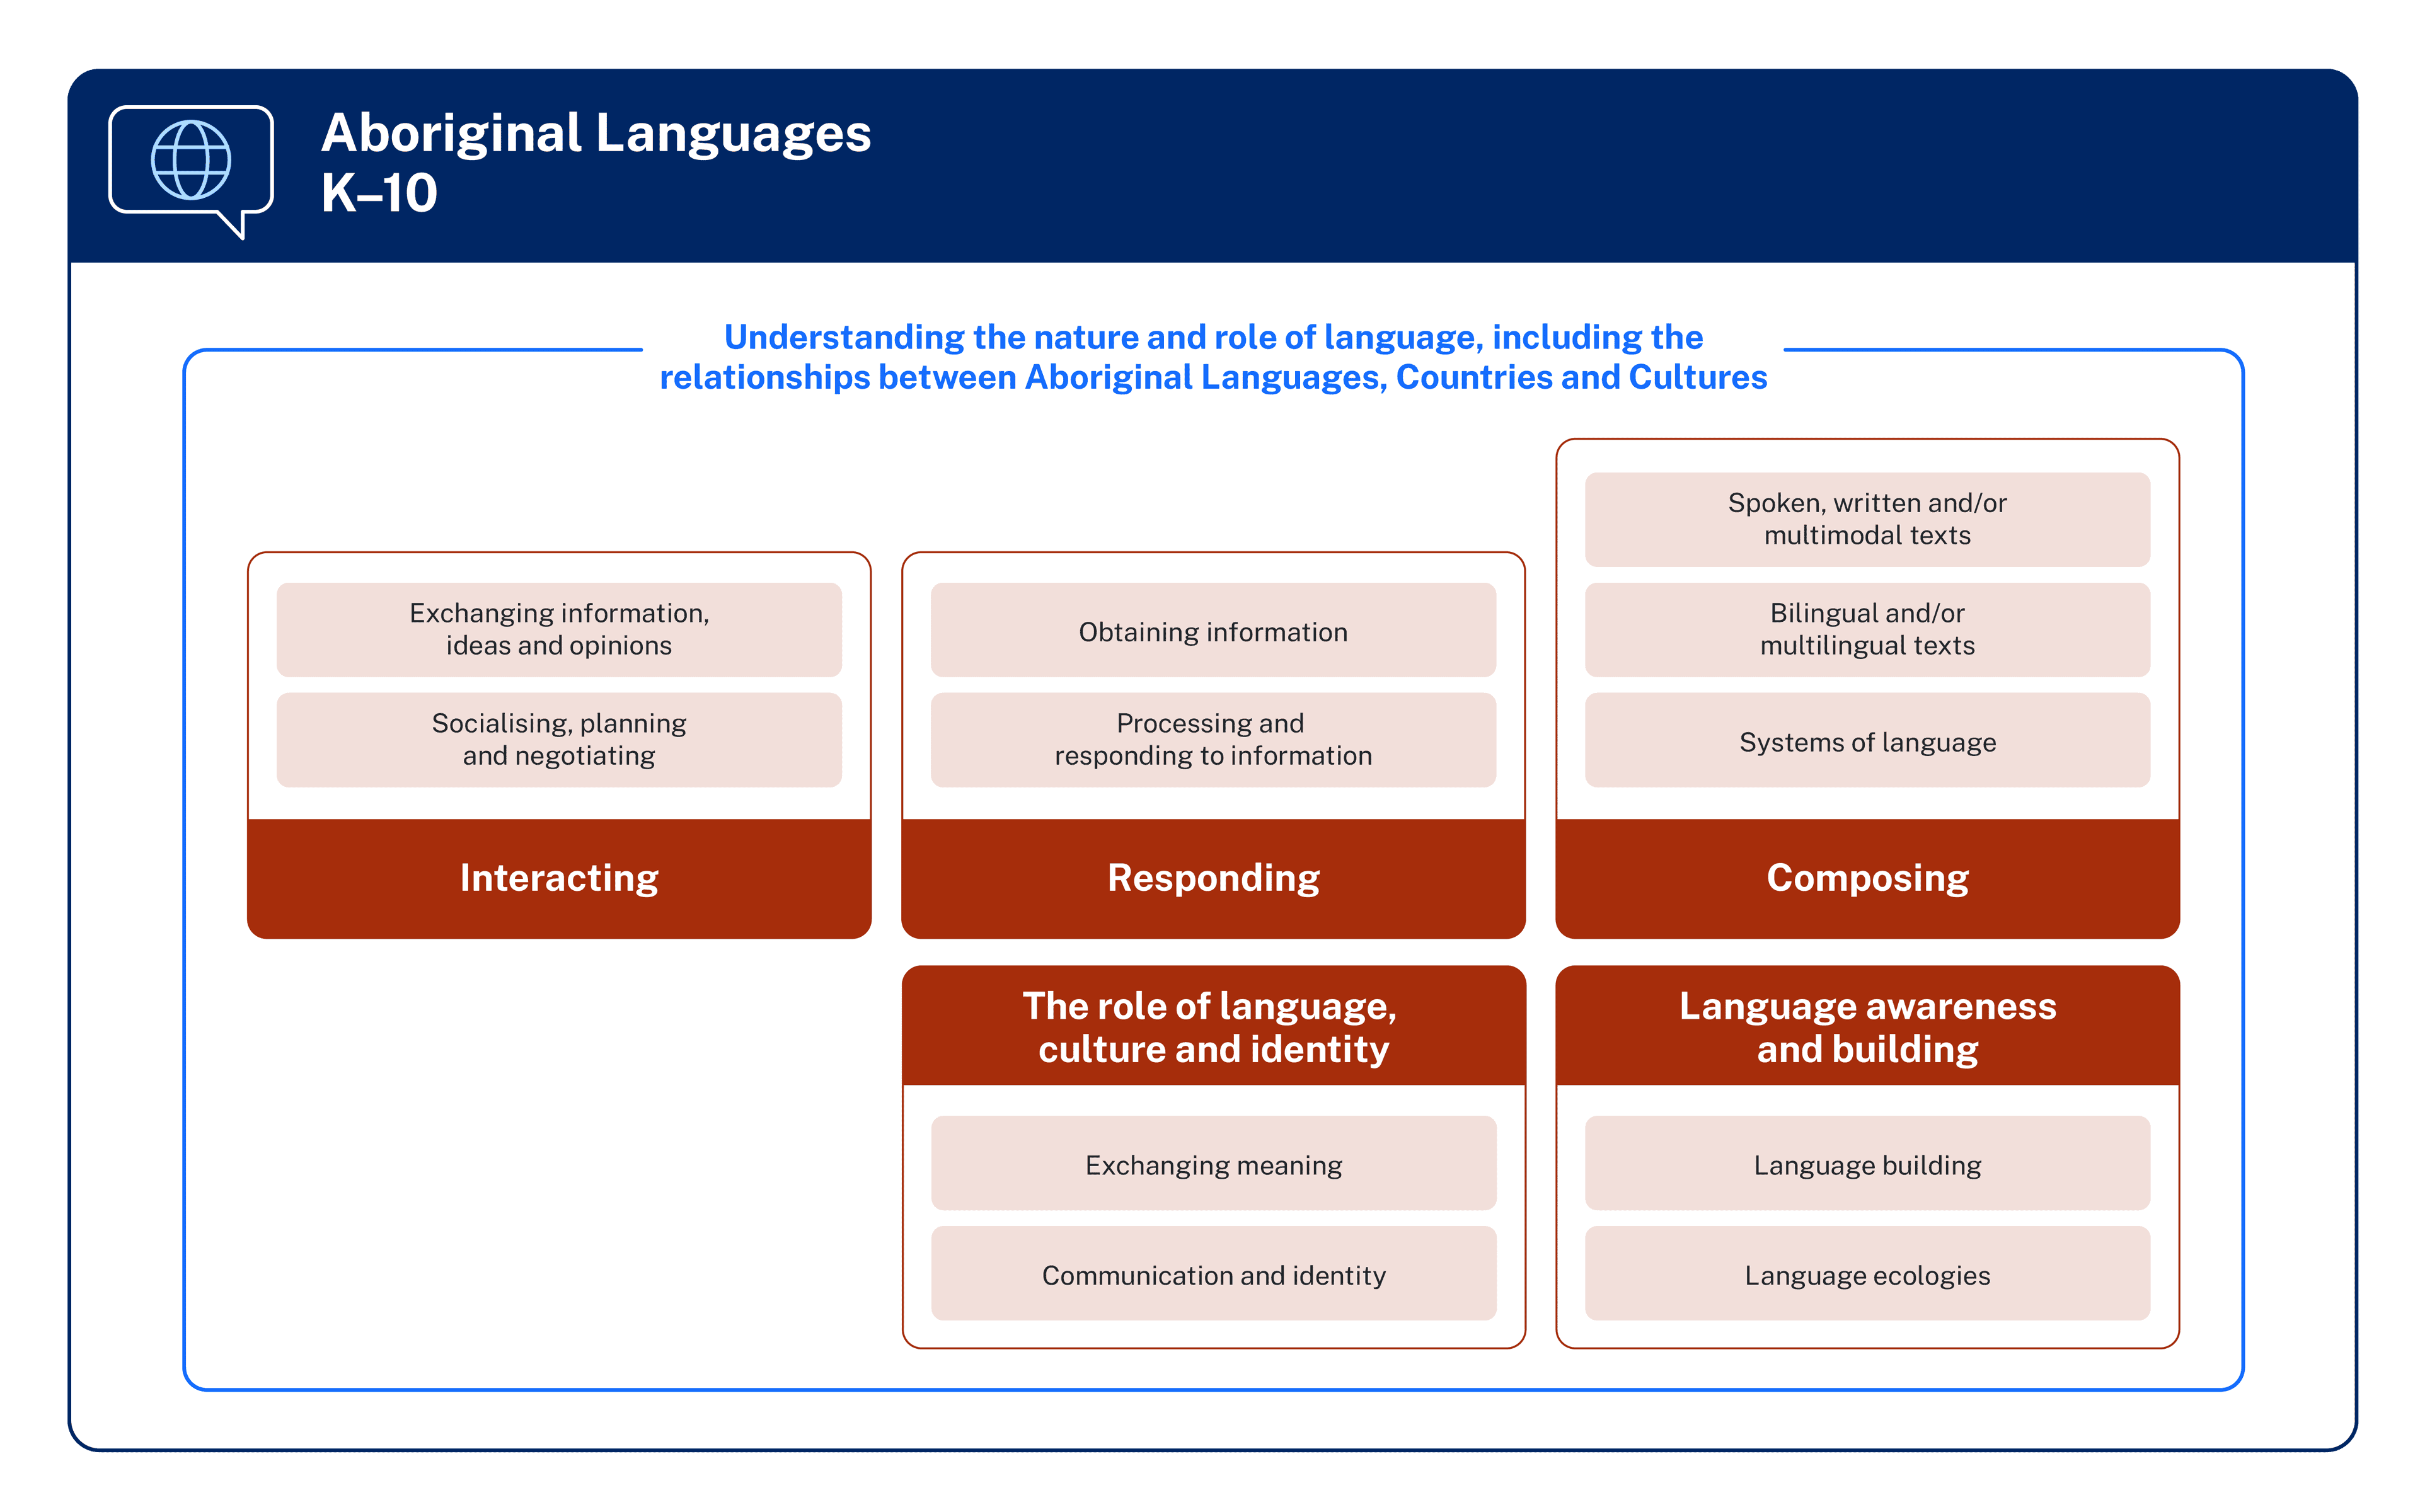 Overview of the Aboriginal Languages syllabus, more detail in text below diagram.